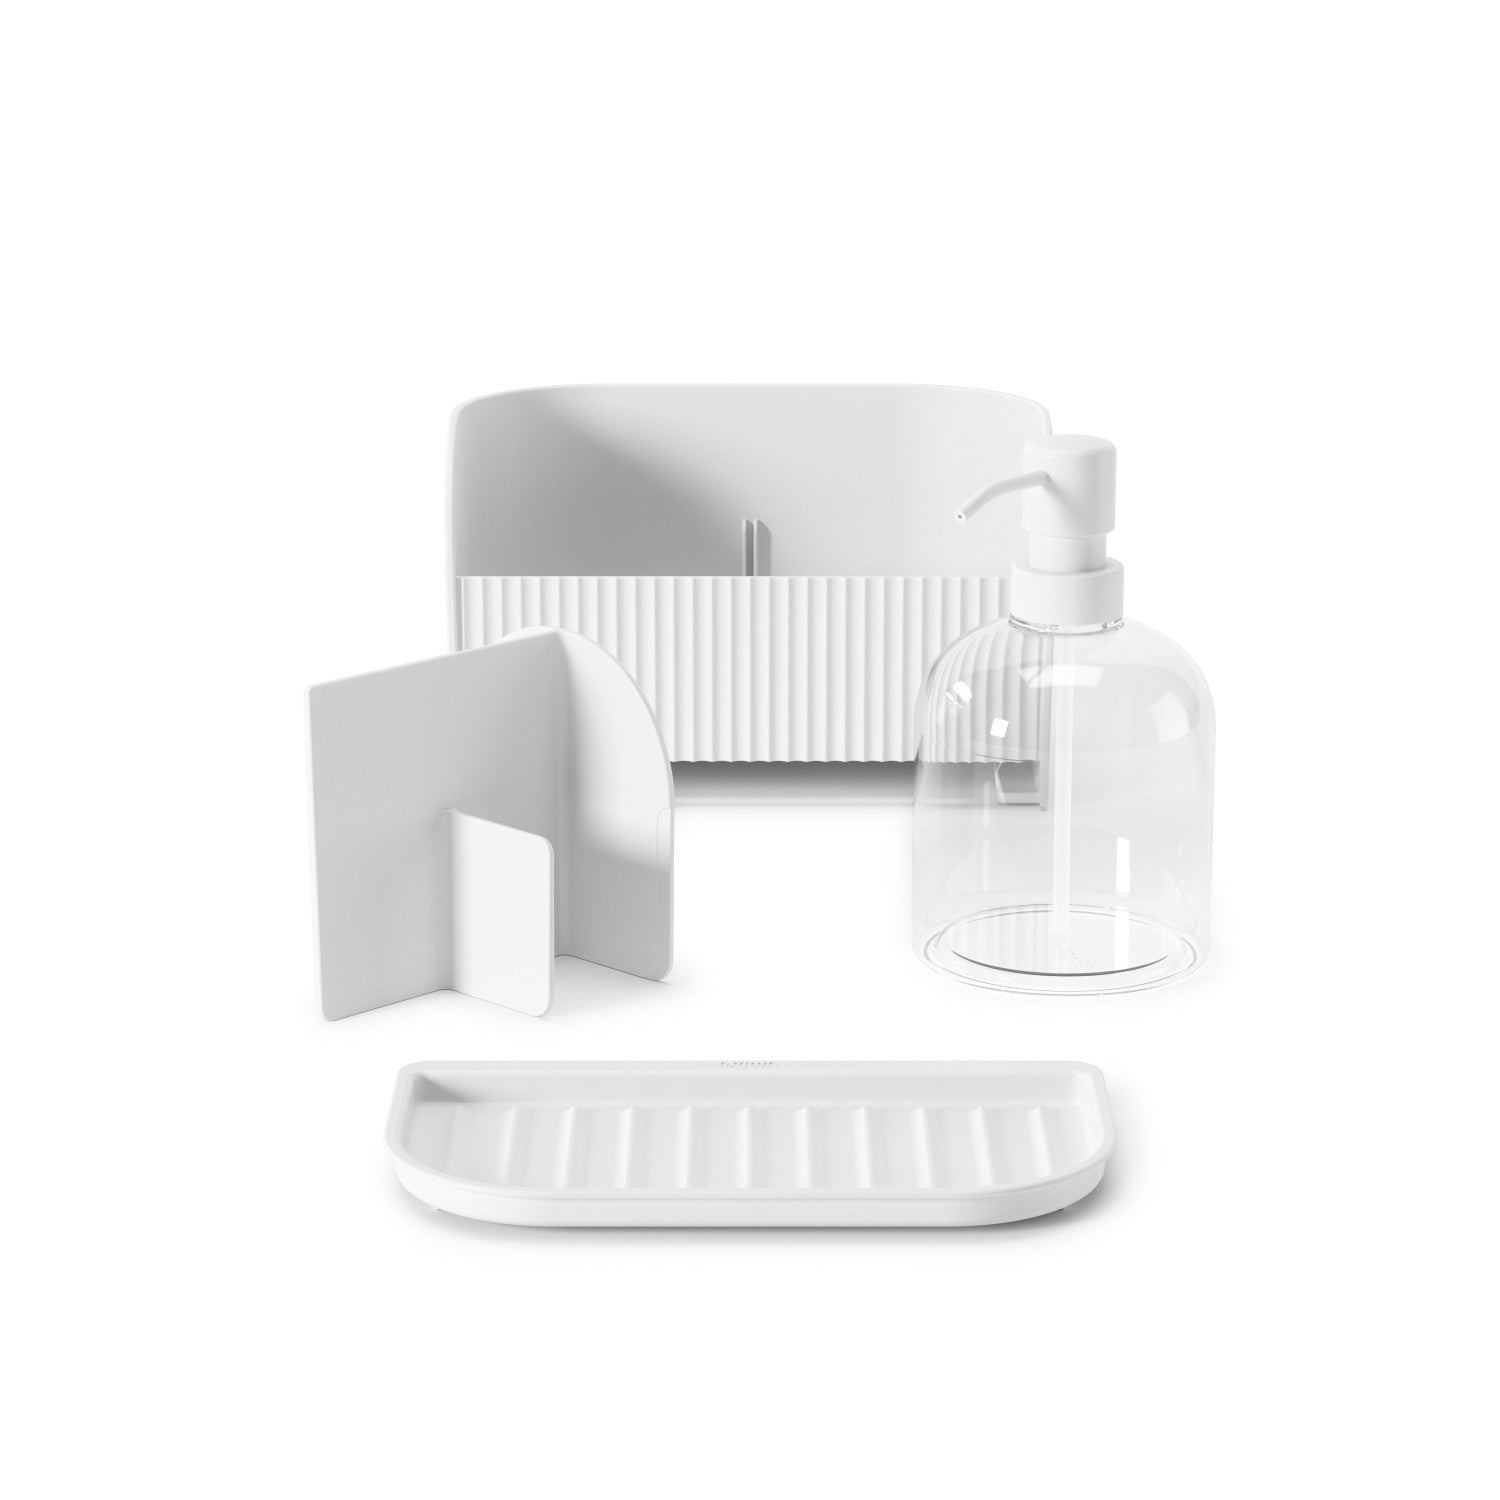 Umbra Sling Sink Caddy with Soap Pump